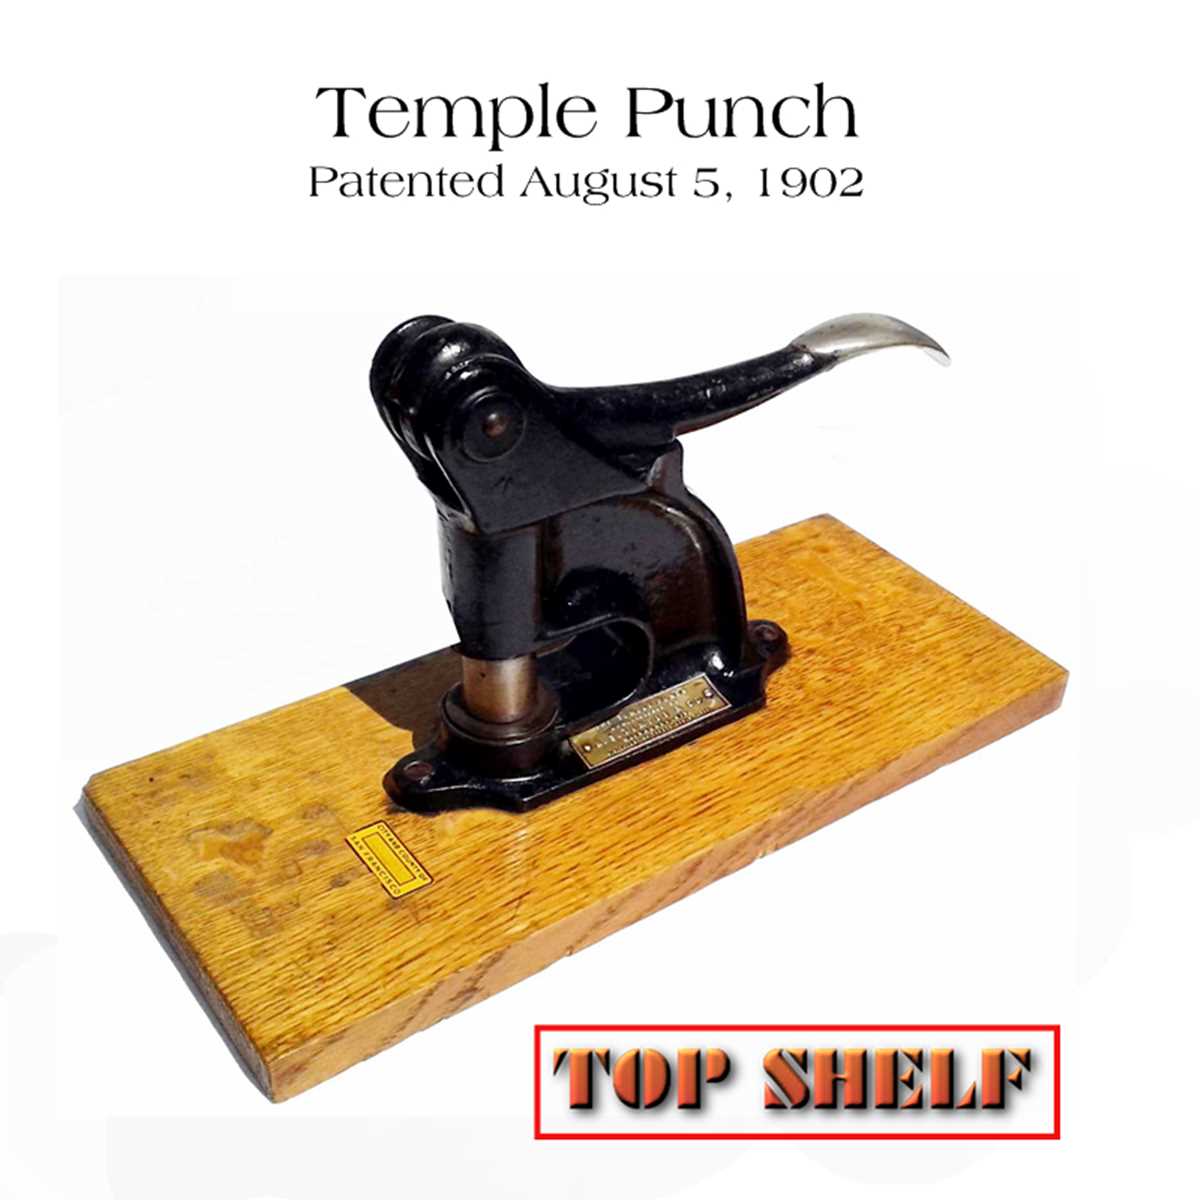 Temple Punch 1902